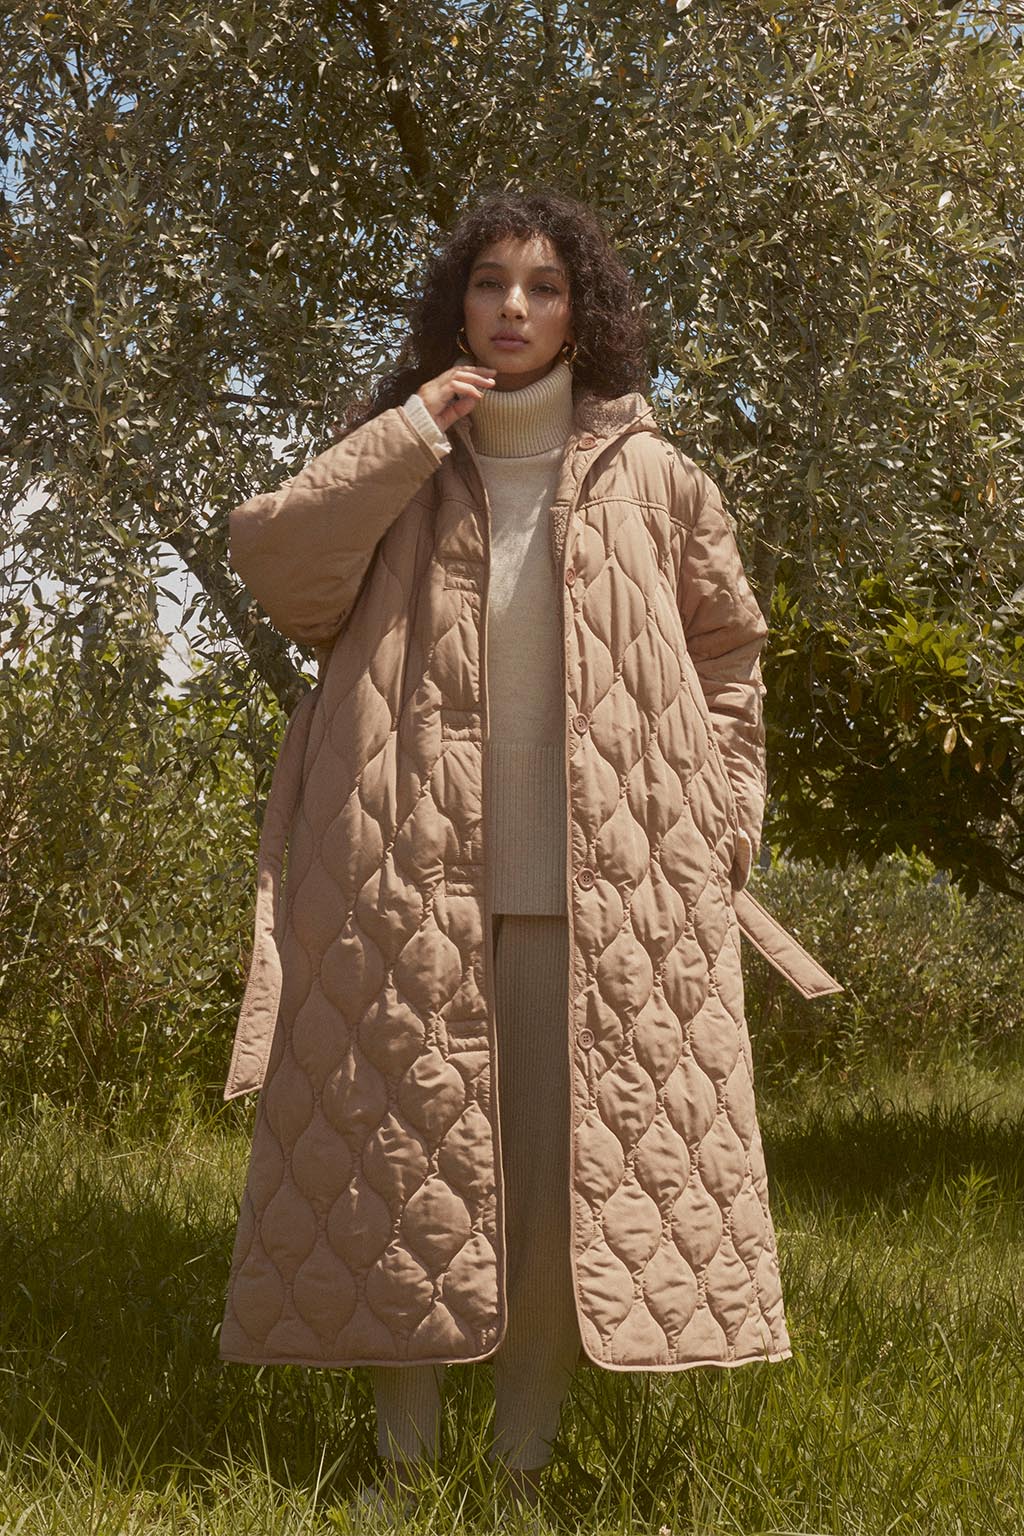 Reversible Quilting Padded Long Coat Beige